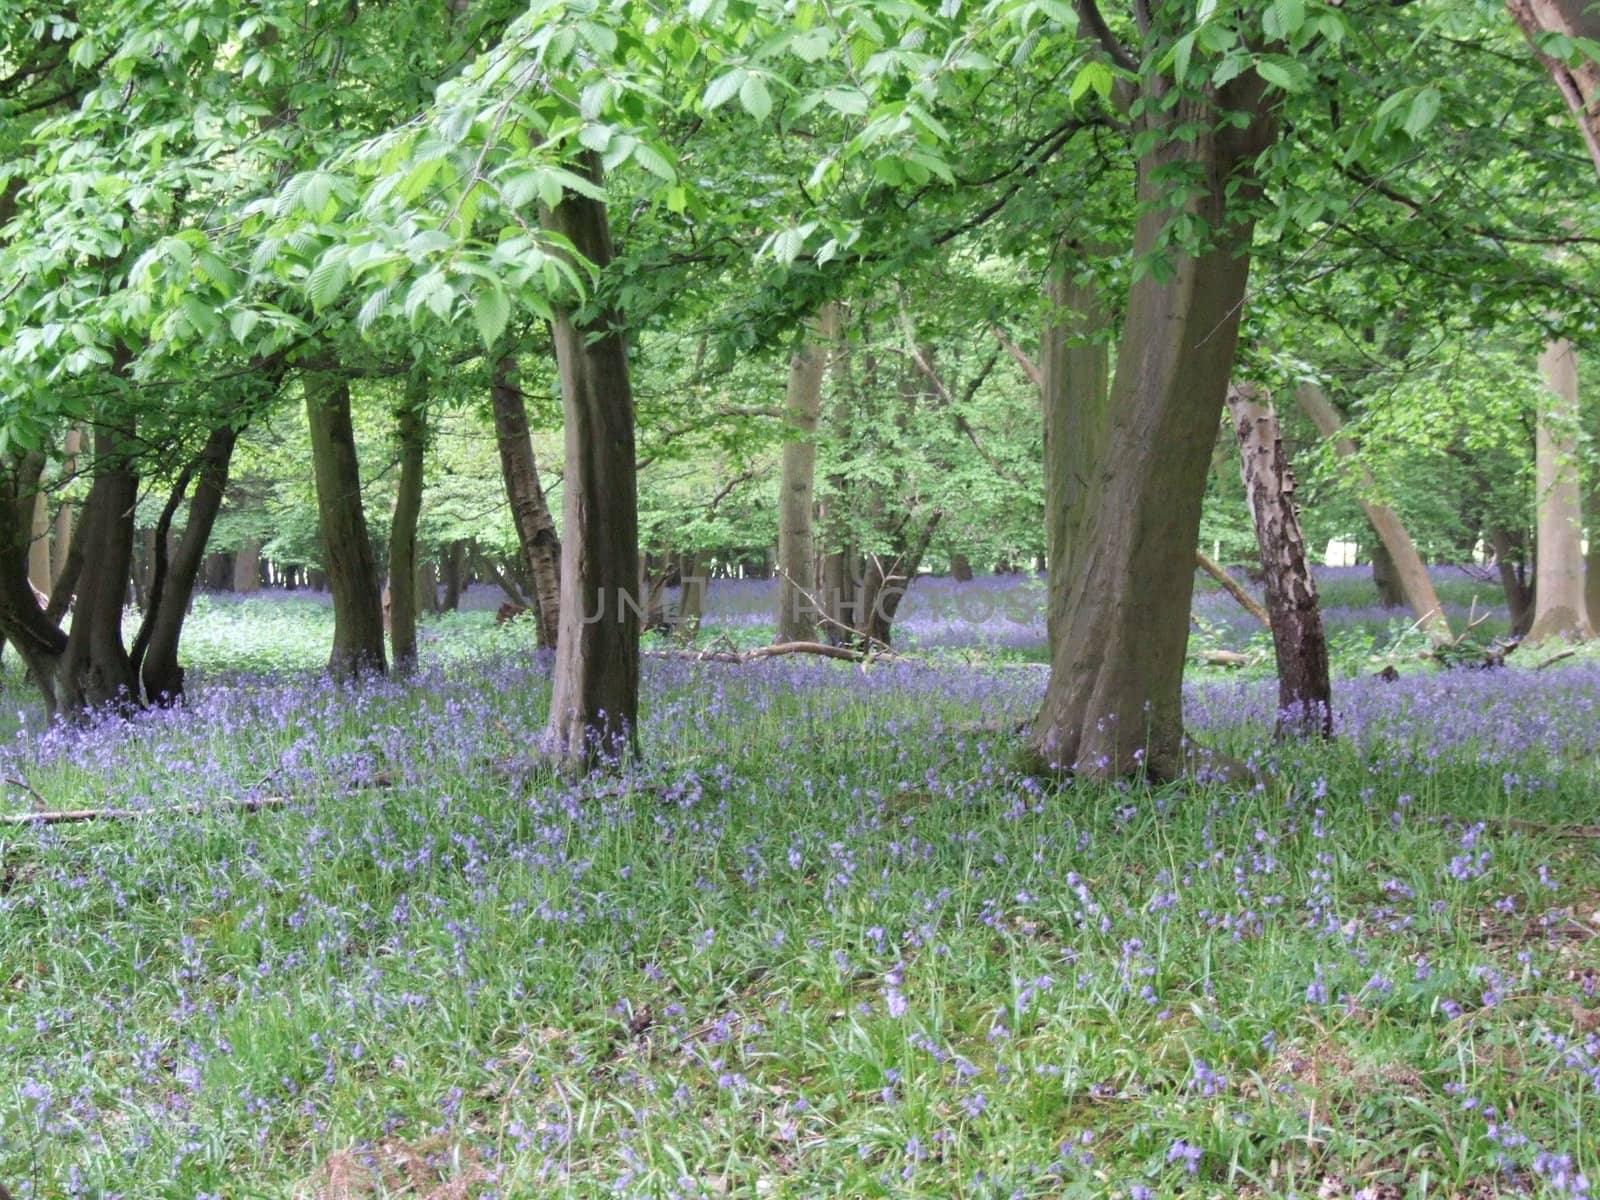 A Blue Bell Flowers Covering Forest Floor